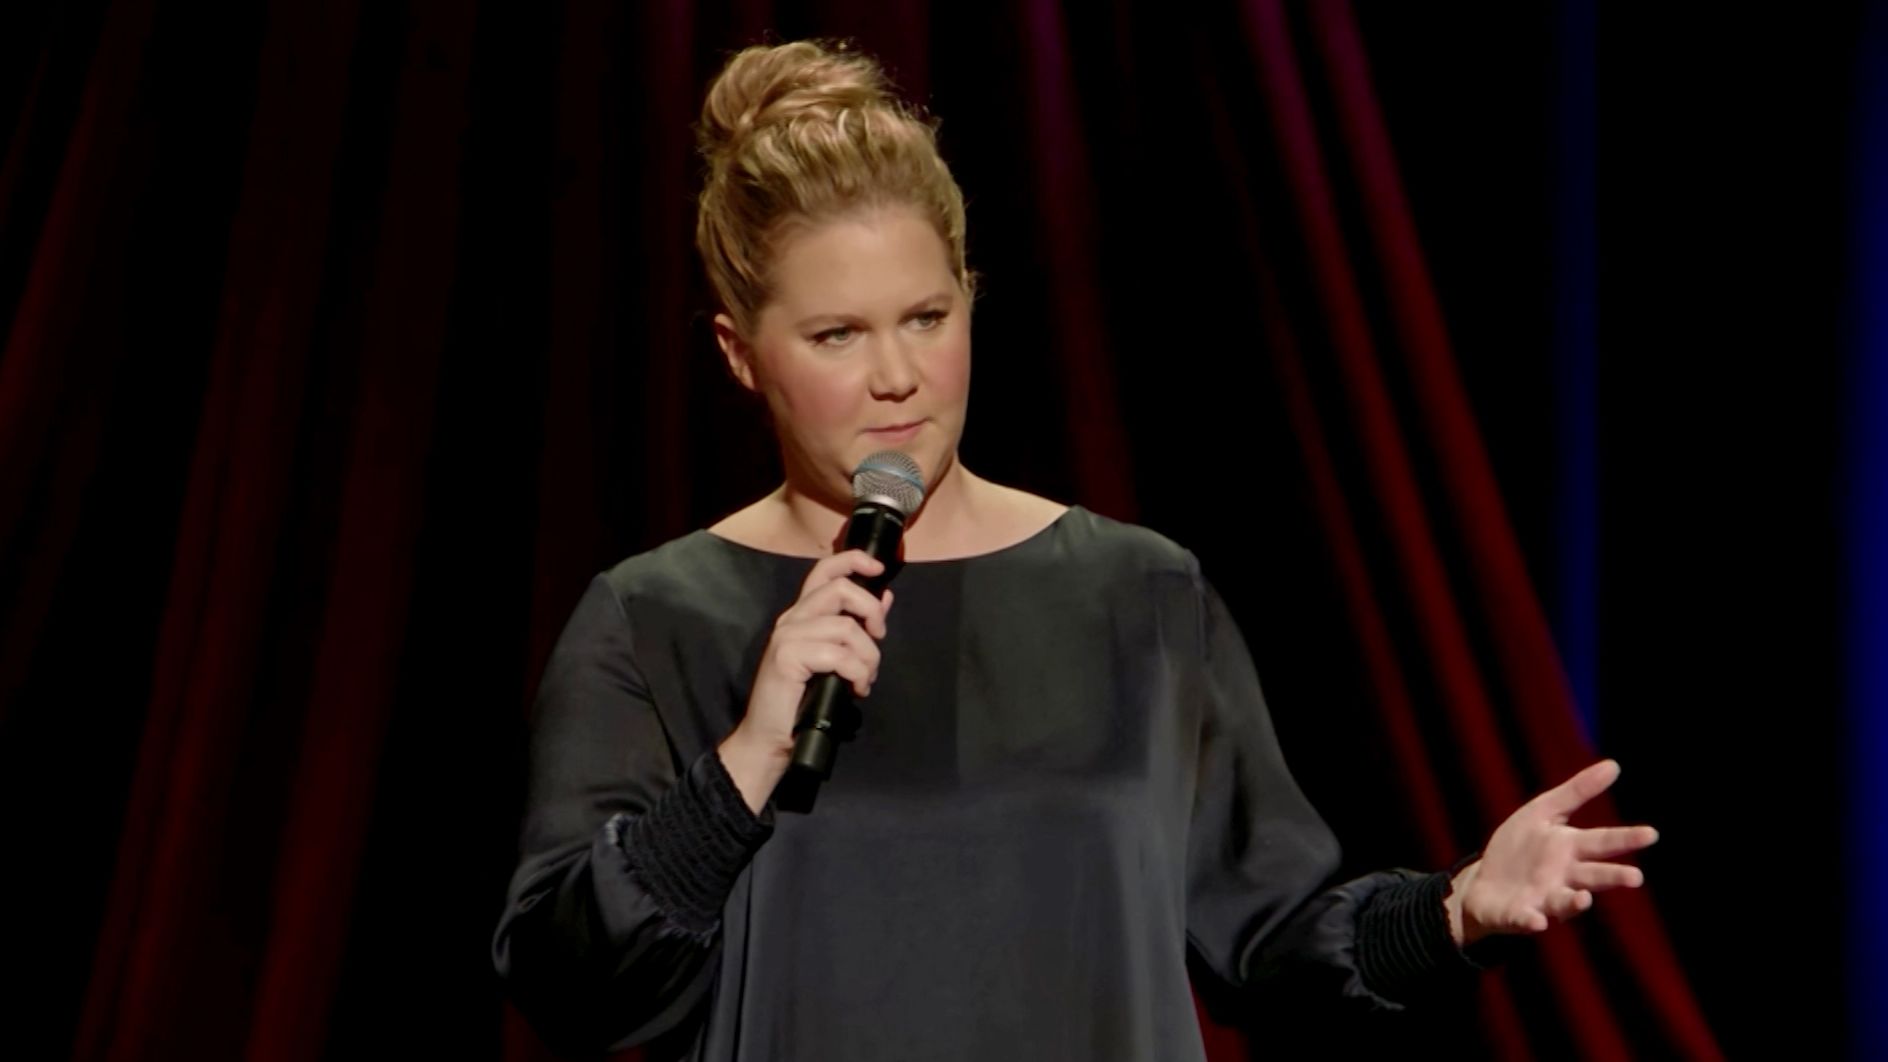 Amy Schumer in her most recent Netflix special, 'Amy Schumer: Growing'